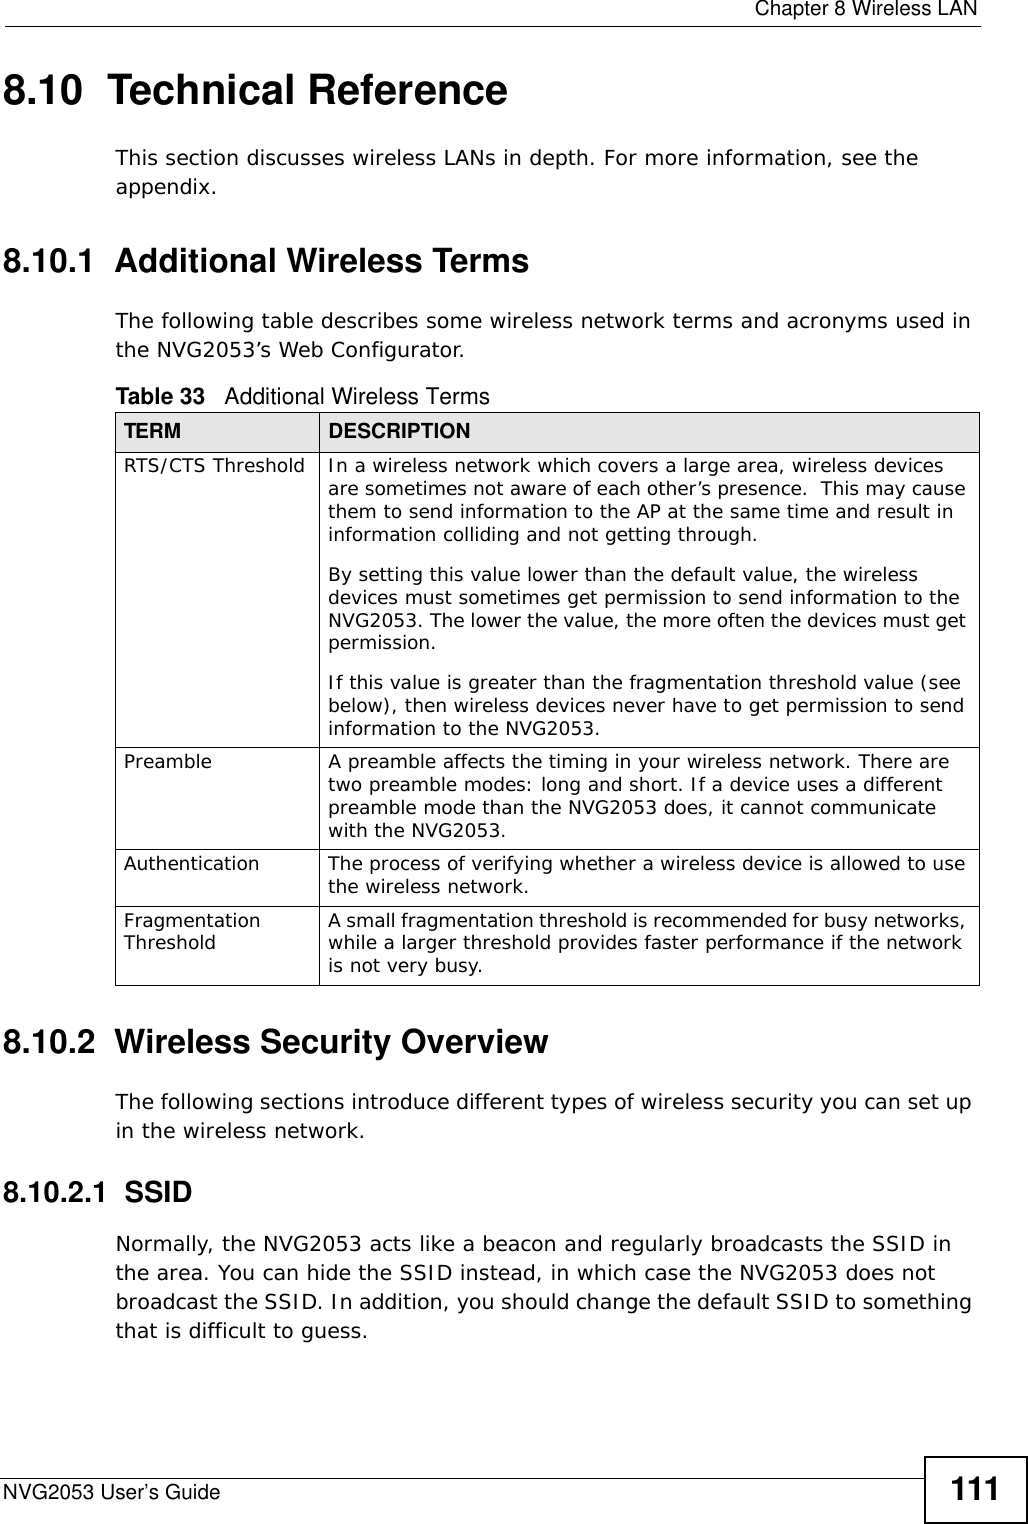  Chapter 8 Wireless LANNVG2053 User’s Guide 1118.10  Technical ReferenceThis section discusses wireless LANs in depth. For more information, see the appendix.8.10.1  Additional Wireless TermsThe following table describes some wireless network terms and acronyms used in the NVG2053’s Web Configurator.8.10.2  Wireless Security OverviewThe following sections introduce different types of wireless security you can set up in the wireless network.8.10.2.1  SSIDNormally, the NVG2053 acts like a beacon and regularly broadcasts the SSID in the area. You can hide the SSID instead, in which case the NVG2053 does not broadcast the SSID. In addition, you should change the default SSID to something that is difficult to guess.Table 33   Additional Wireless TermsTERM DESCRIPTIONRTS/CTS Threshold In a wireless network which covers a large area, wireless devices are sometimes not aware of each other’s presence.  This may cause them to send information to the AP at the same time and result in information colliding and not getting through.By setting this value lower than the default value, the wireless devices must sometimes get permission to send information to the NVG2053. The lower the value, the more often the devices must get permission.If this value is greater than the fragmentation threshold value (see below), then wireless devices never have to get permission to send information to the NVG2053.Preamble A preamble affects the timing in your wireless network. There are two preamble modes: long and short. If a device uses a different preamble mode than the NVG2053 does, it cannot communicate with the NVG2053.Authentication The process of verifying whether a wireless device is allowed to use the wireless network.Fragmentation Threshold A small fragmentation threshold is recommended for busy networks, while a larger threshold provides faster performance if the network is not very busy.